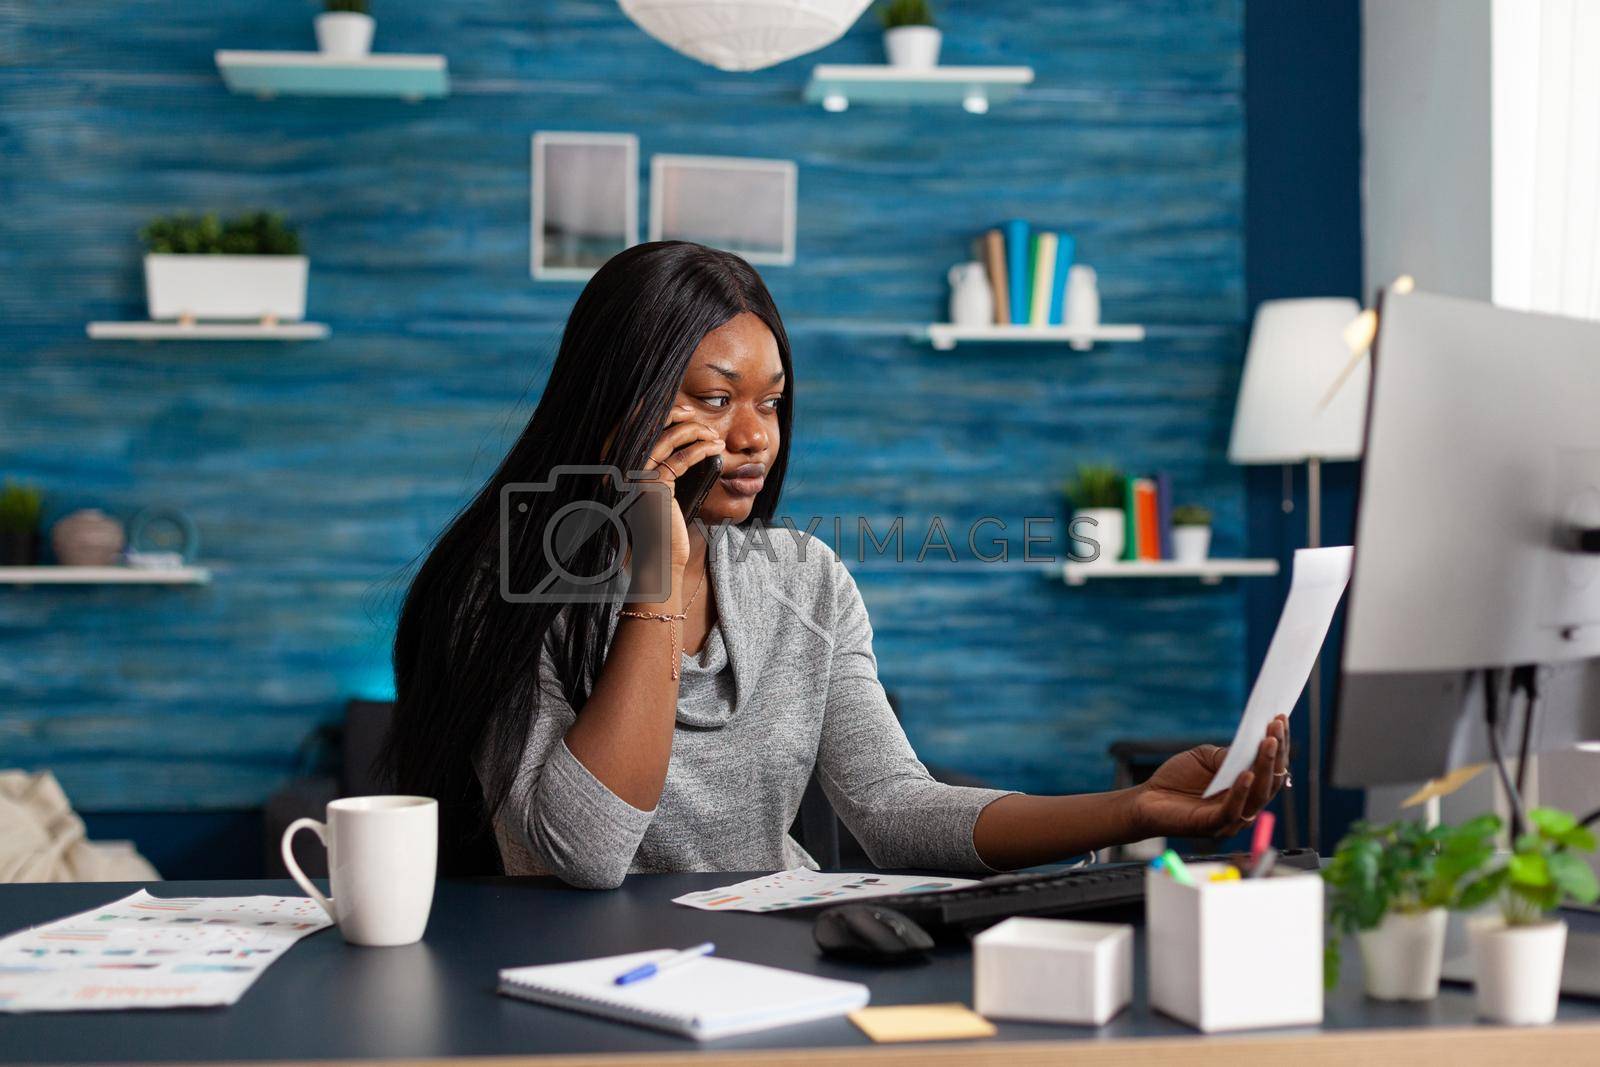 Black sad student interacting with collegue explaining communication course ideas using phone sitting at desk in living room. African woman working at academic homework using elearning platform